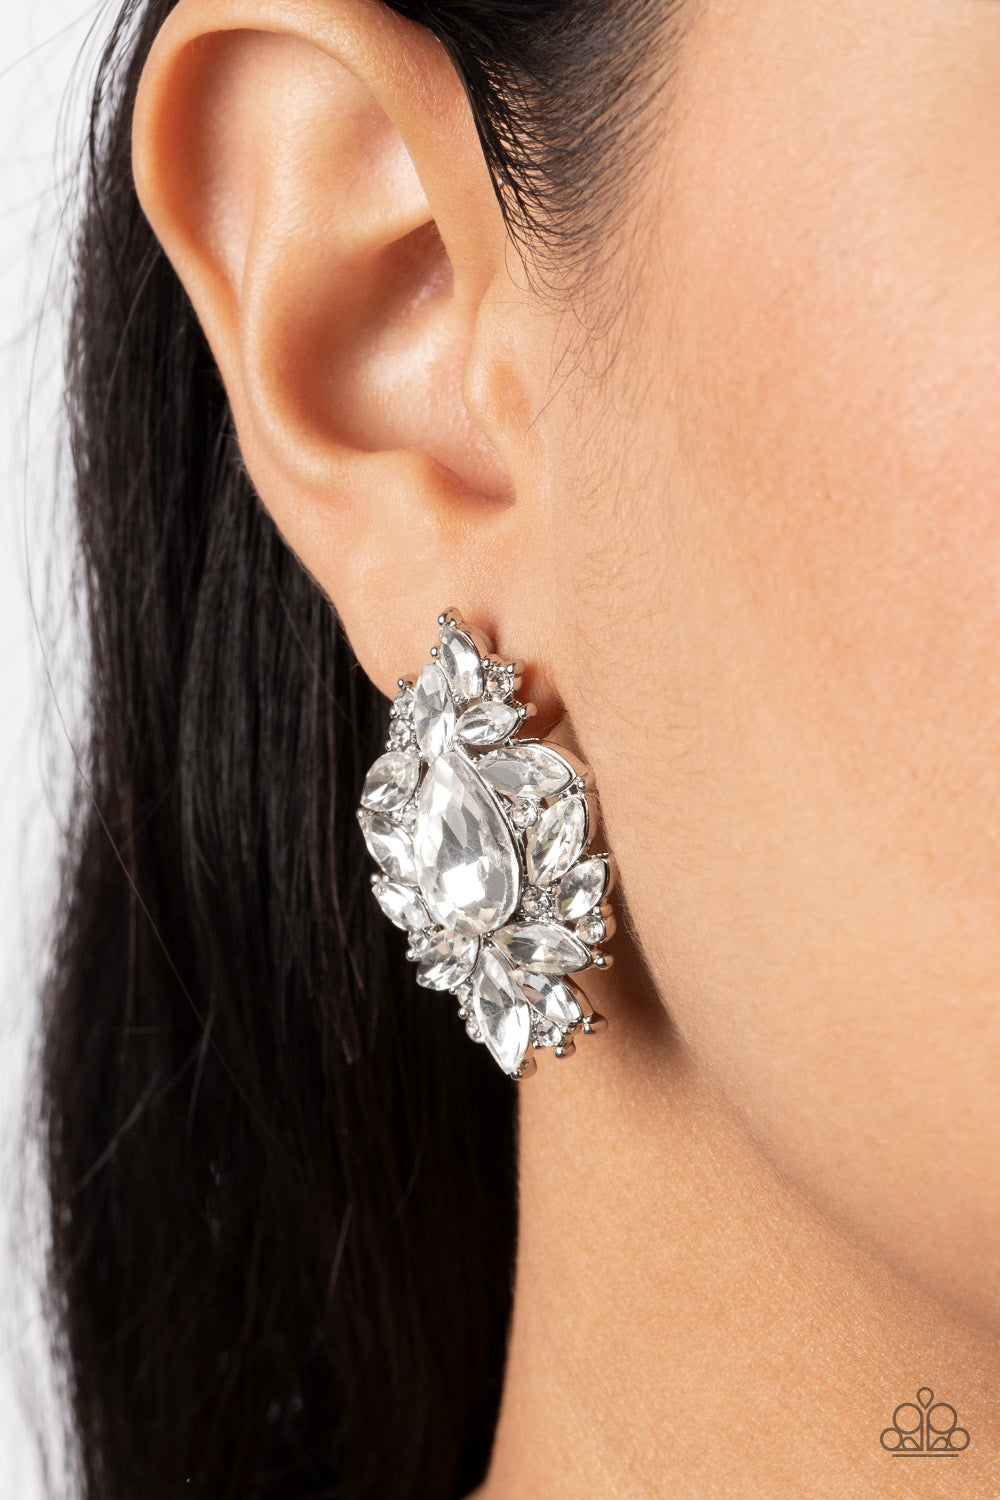 We All Scream for Ice QUEEN - Paparazzi Earrings - Paparazzi Jewelry Images 